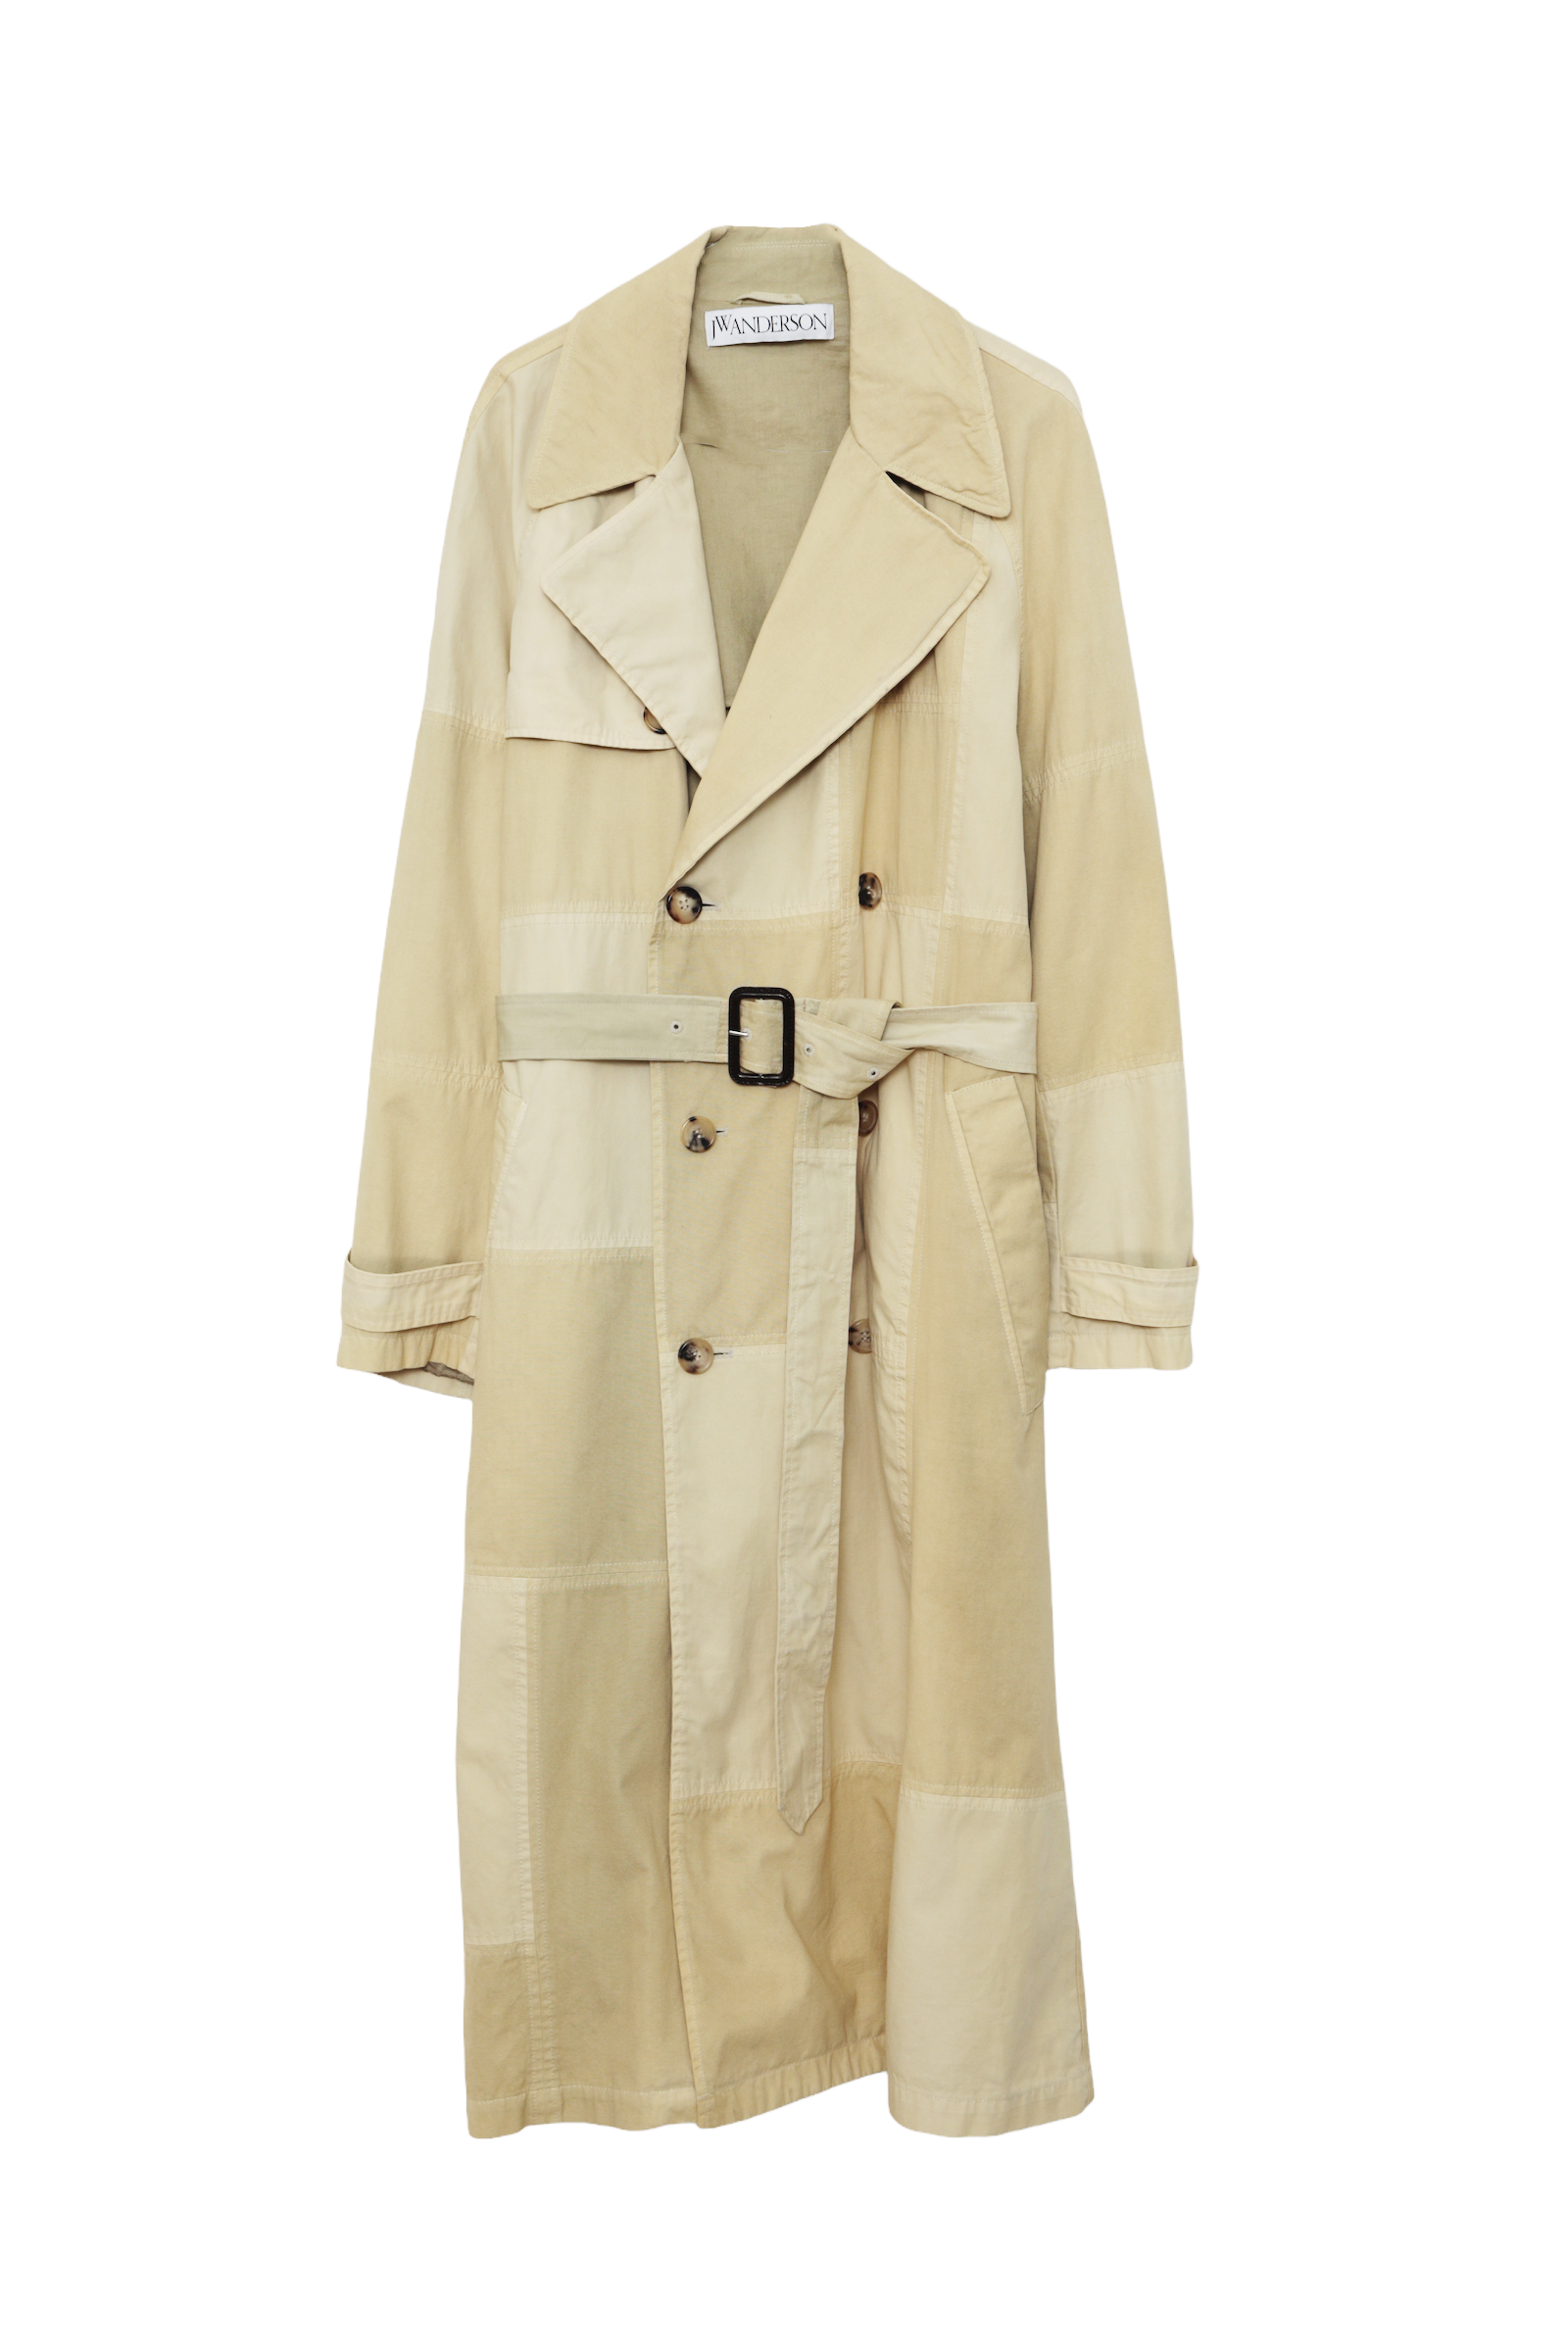 J.W ANDERSON PATCHWORK TRENCH COAT